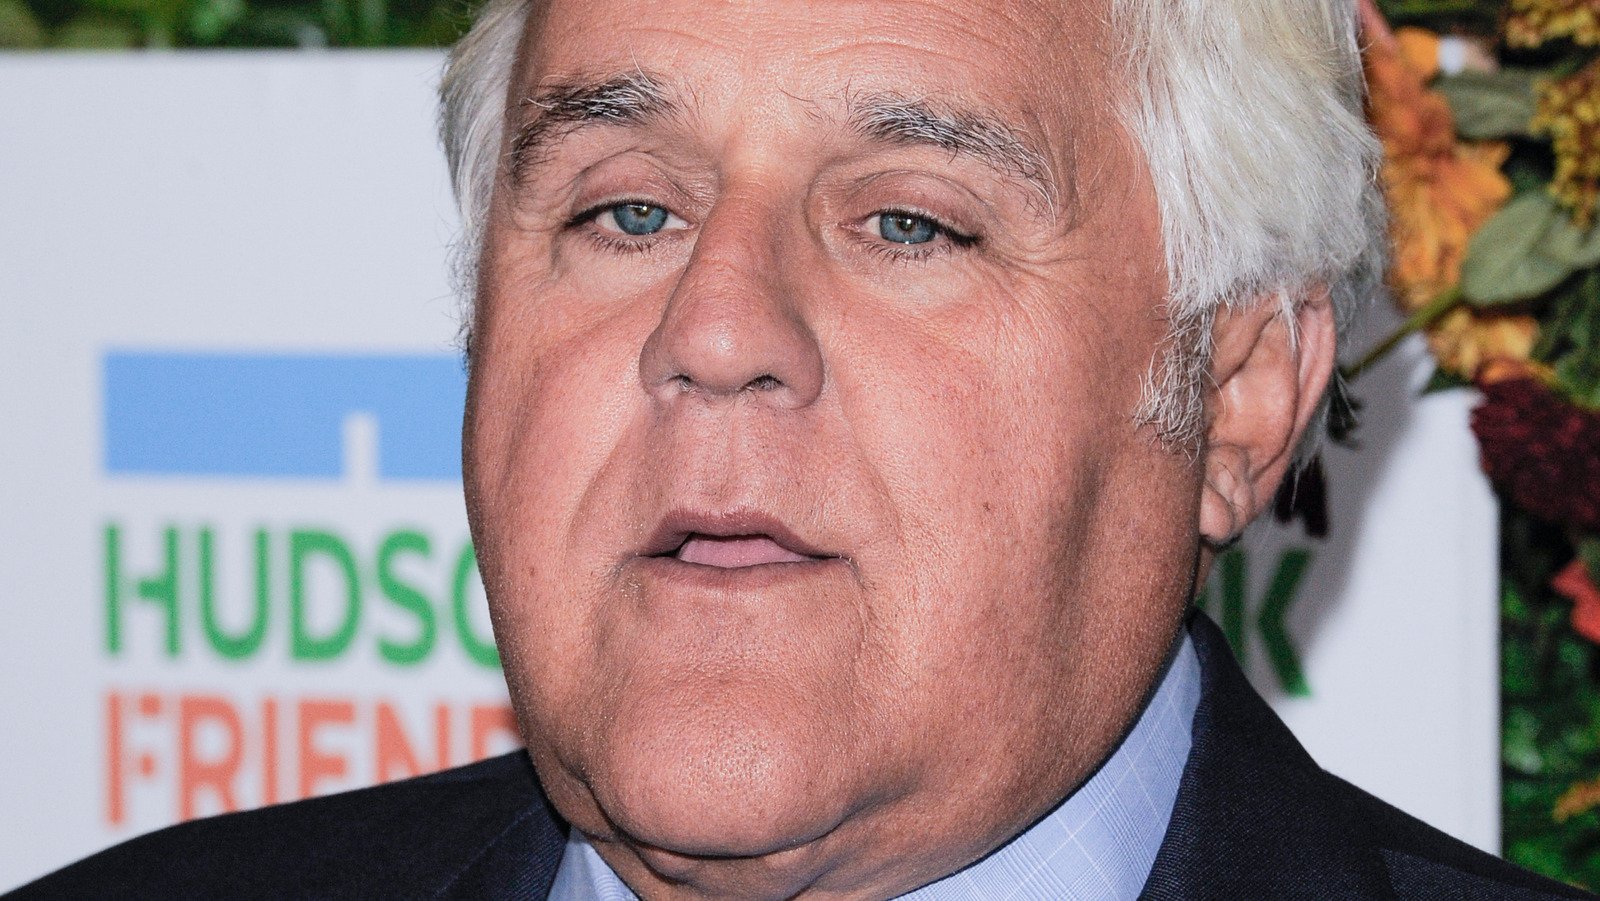 Jay Leno Breaks Multiple Bones In Motorcycle Accident, Just Months After Garage Fire